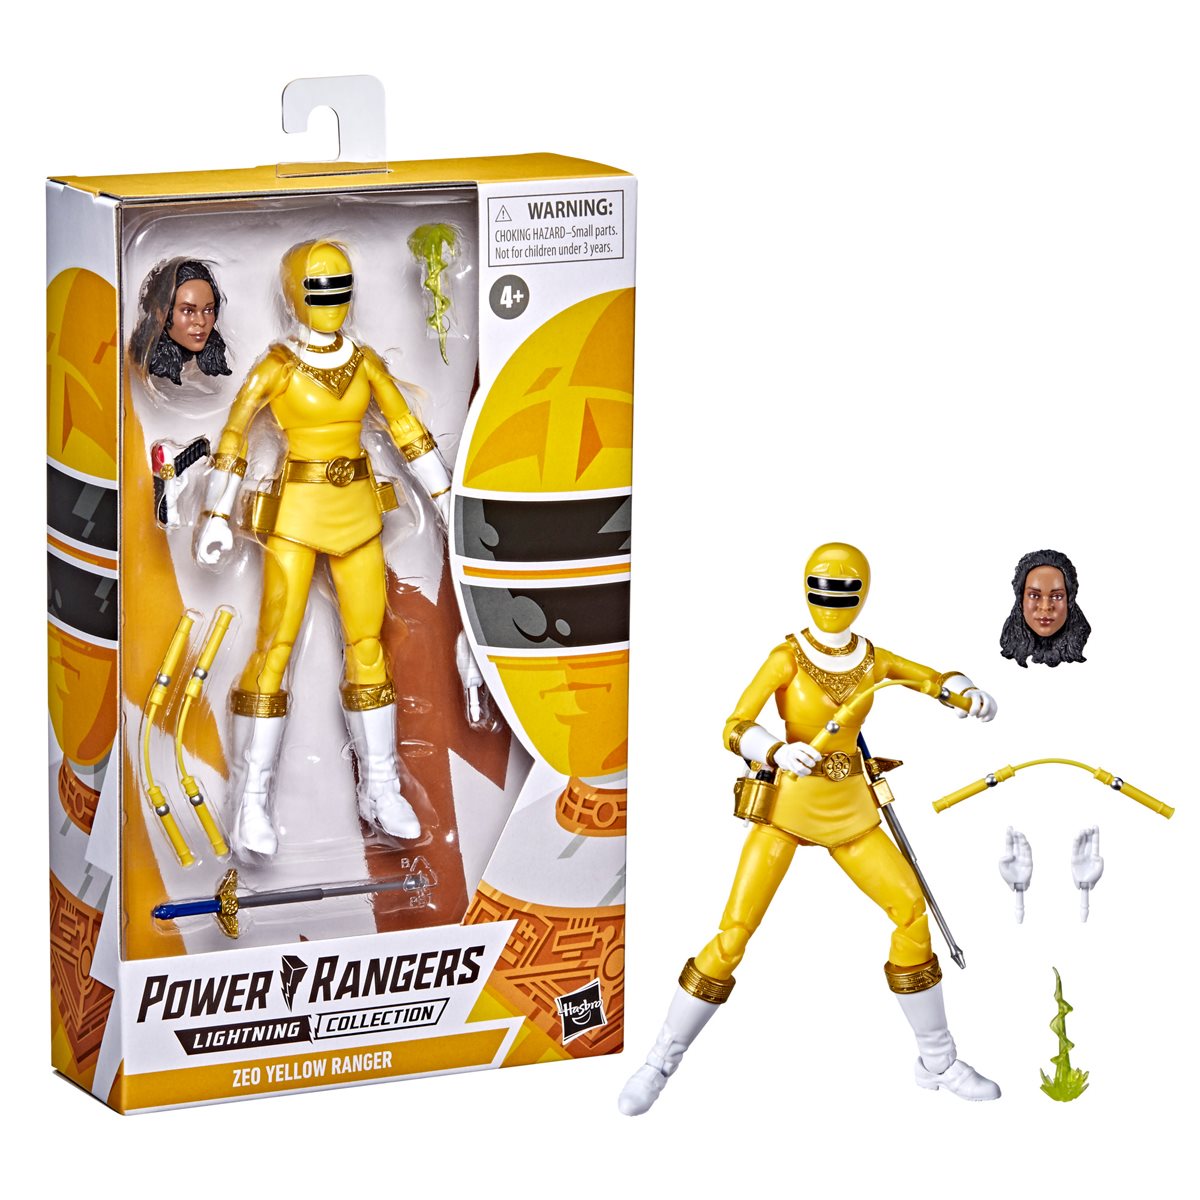 Power Rangers Lightning Collection Wave 4 Set of 4 